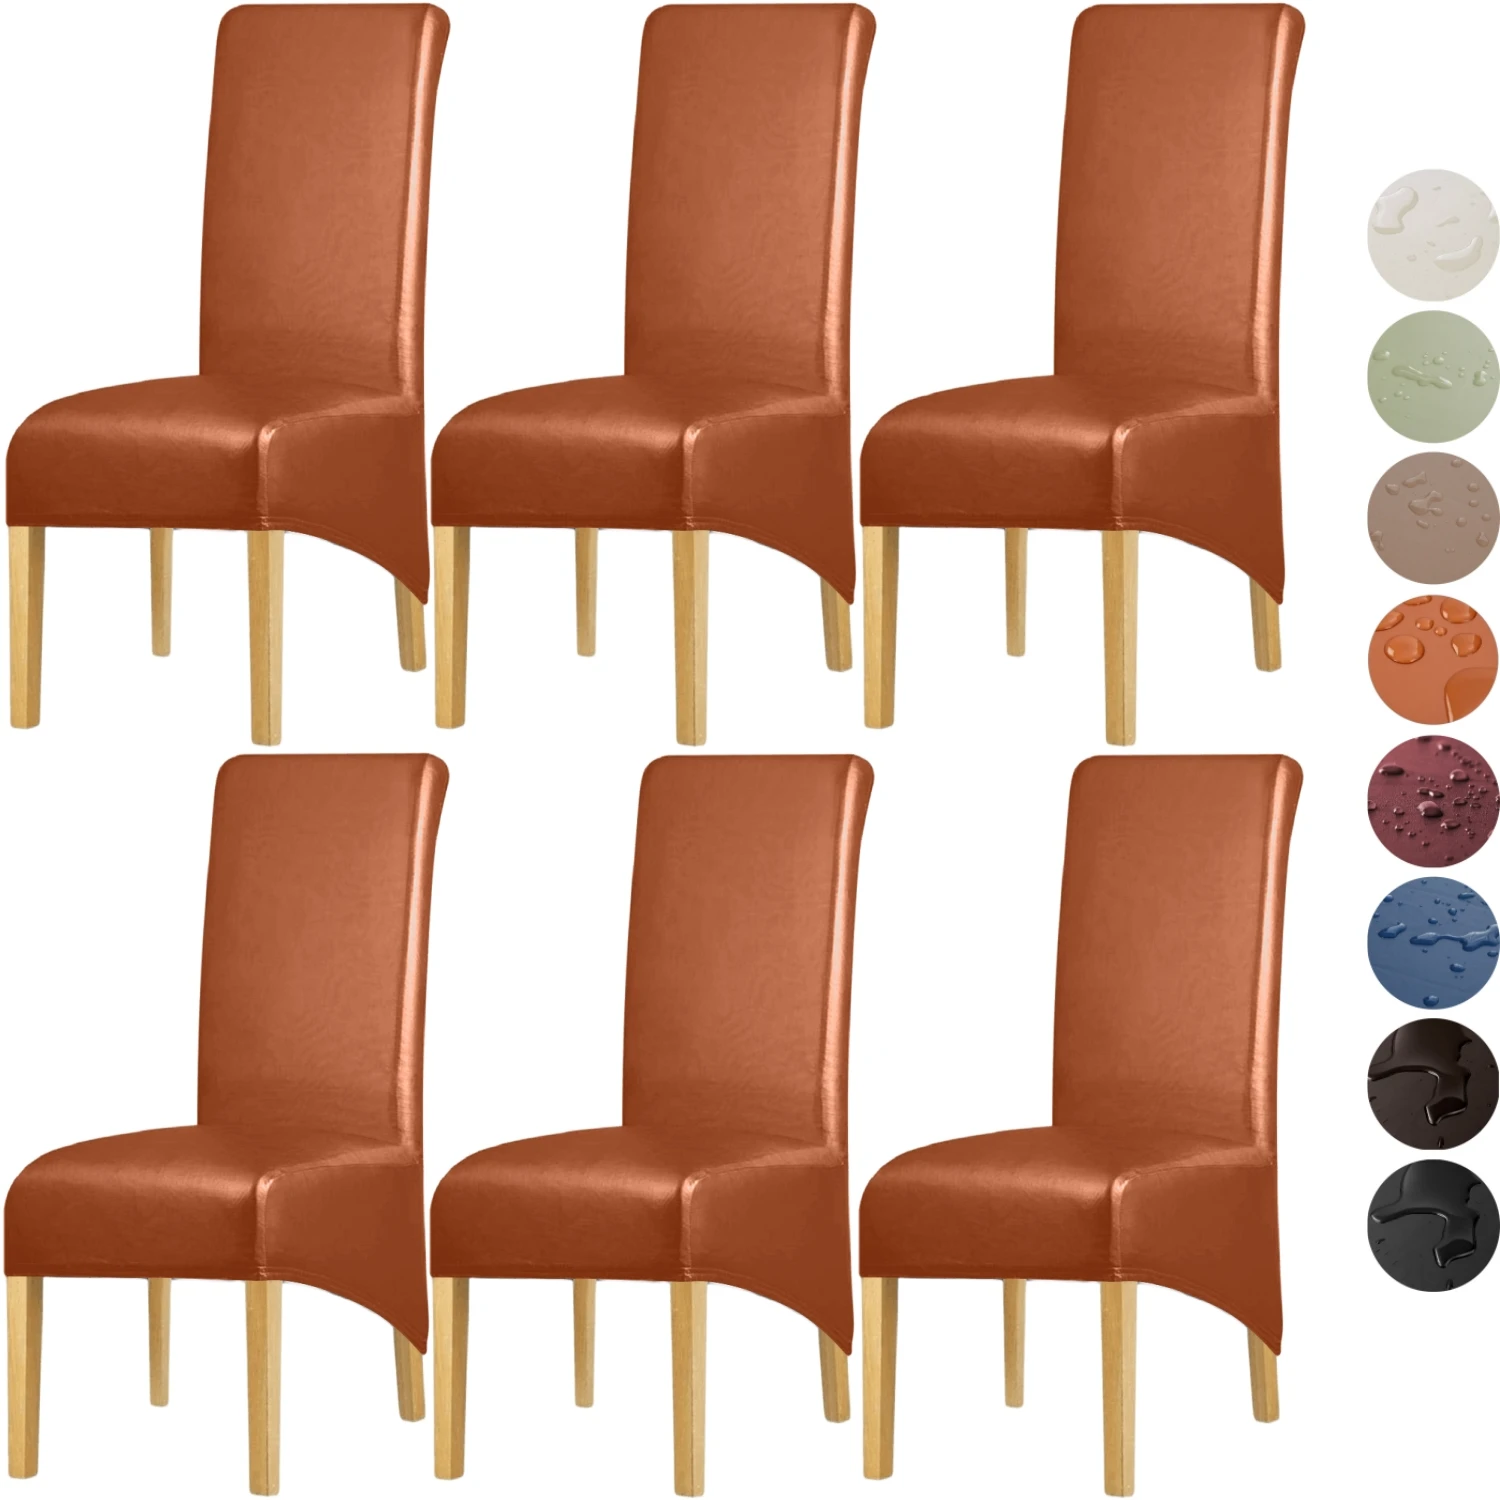 

6 Piece XL PU Leather Chair Covers Dining Room Waterproof Solid Extra Large Chair Slipcover Wedding Party Chair Cover Removable